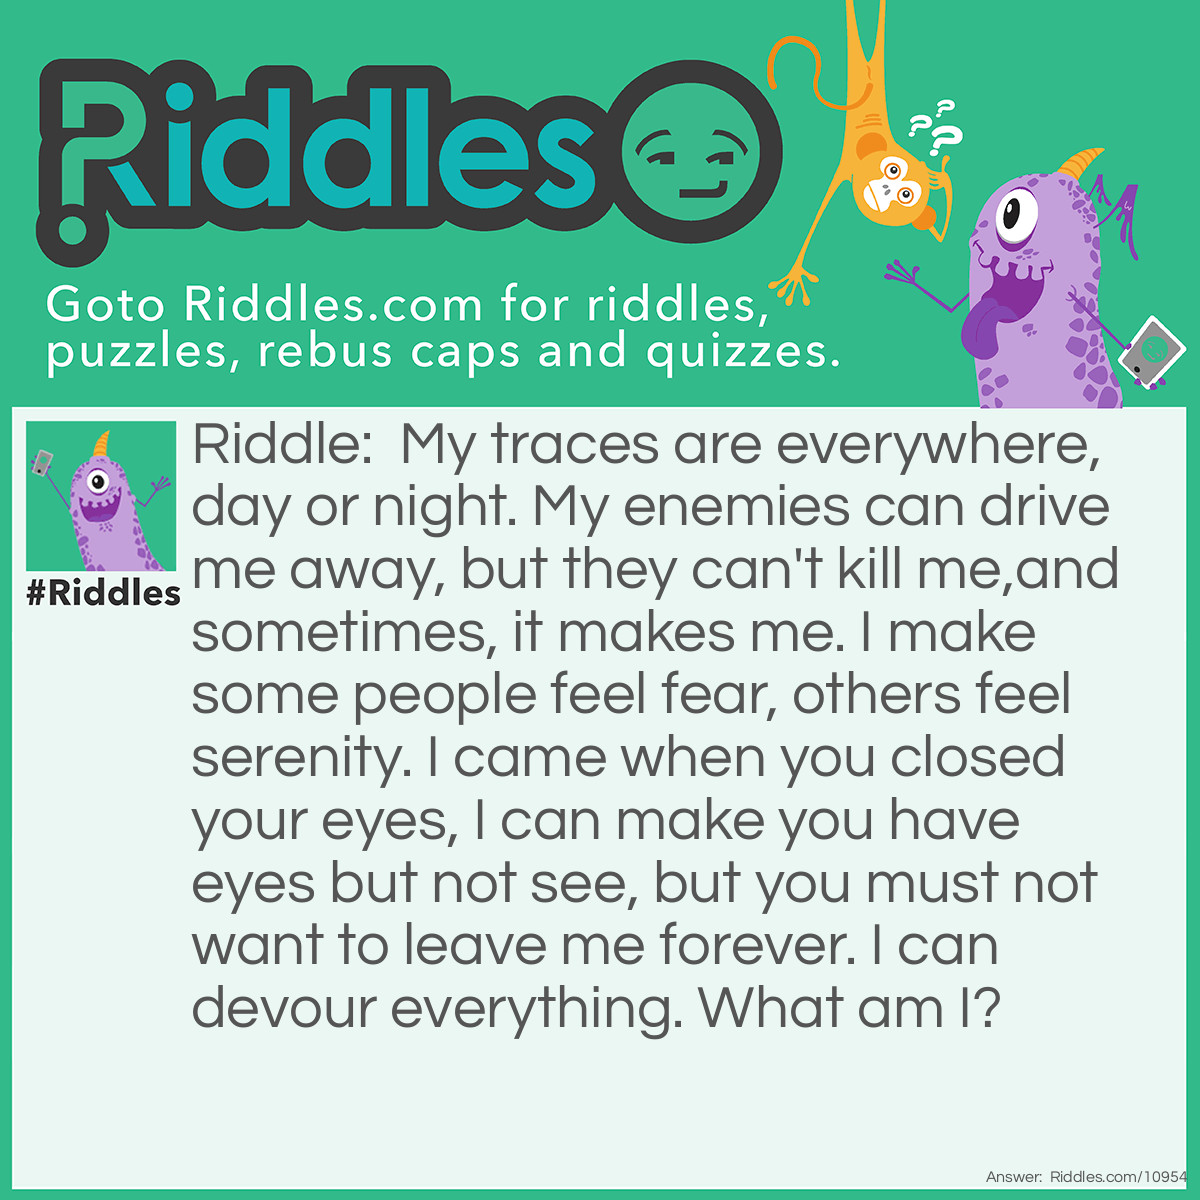 Riddle: My traces are everywhere, day or night. My enemies can drive me away, but they can't kill me,and sometimes, it makes me. I make some people feel fear, others feel serenity. I came when you closed your eyes, I can make you have eyes but not see, but you must not want to leave me forever. I can devour everything. What am I? Answer: Darkness.